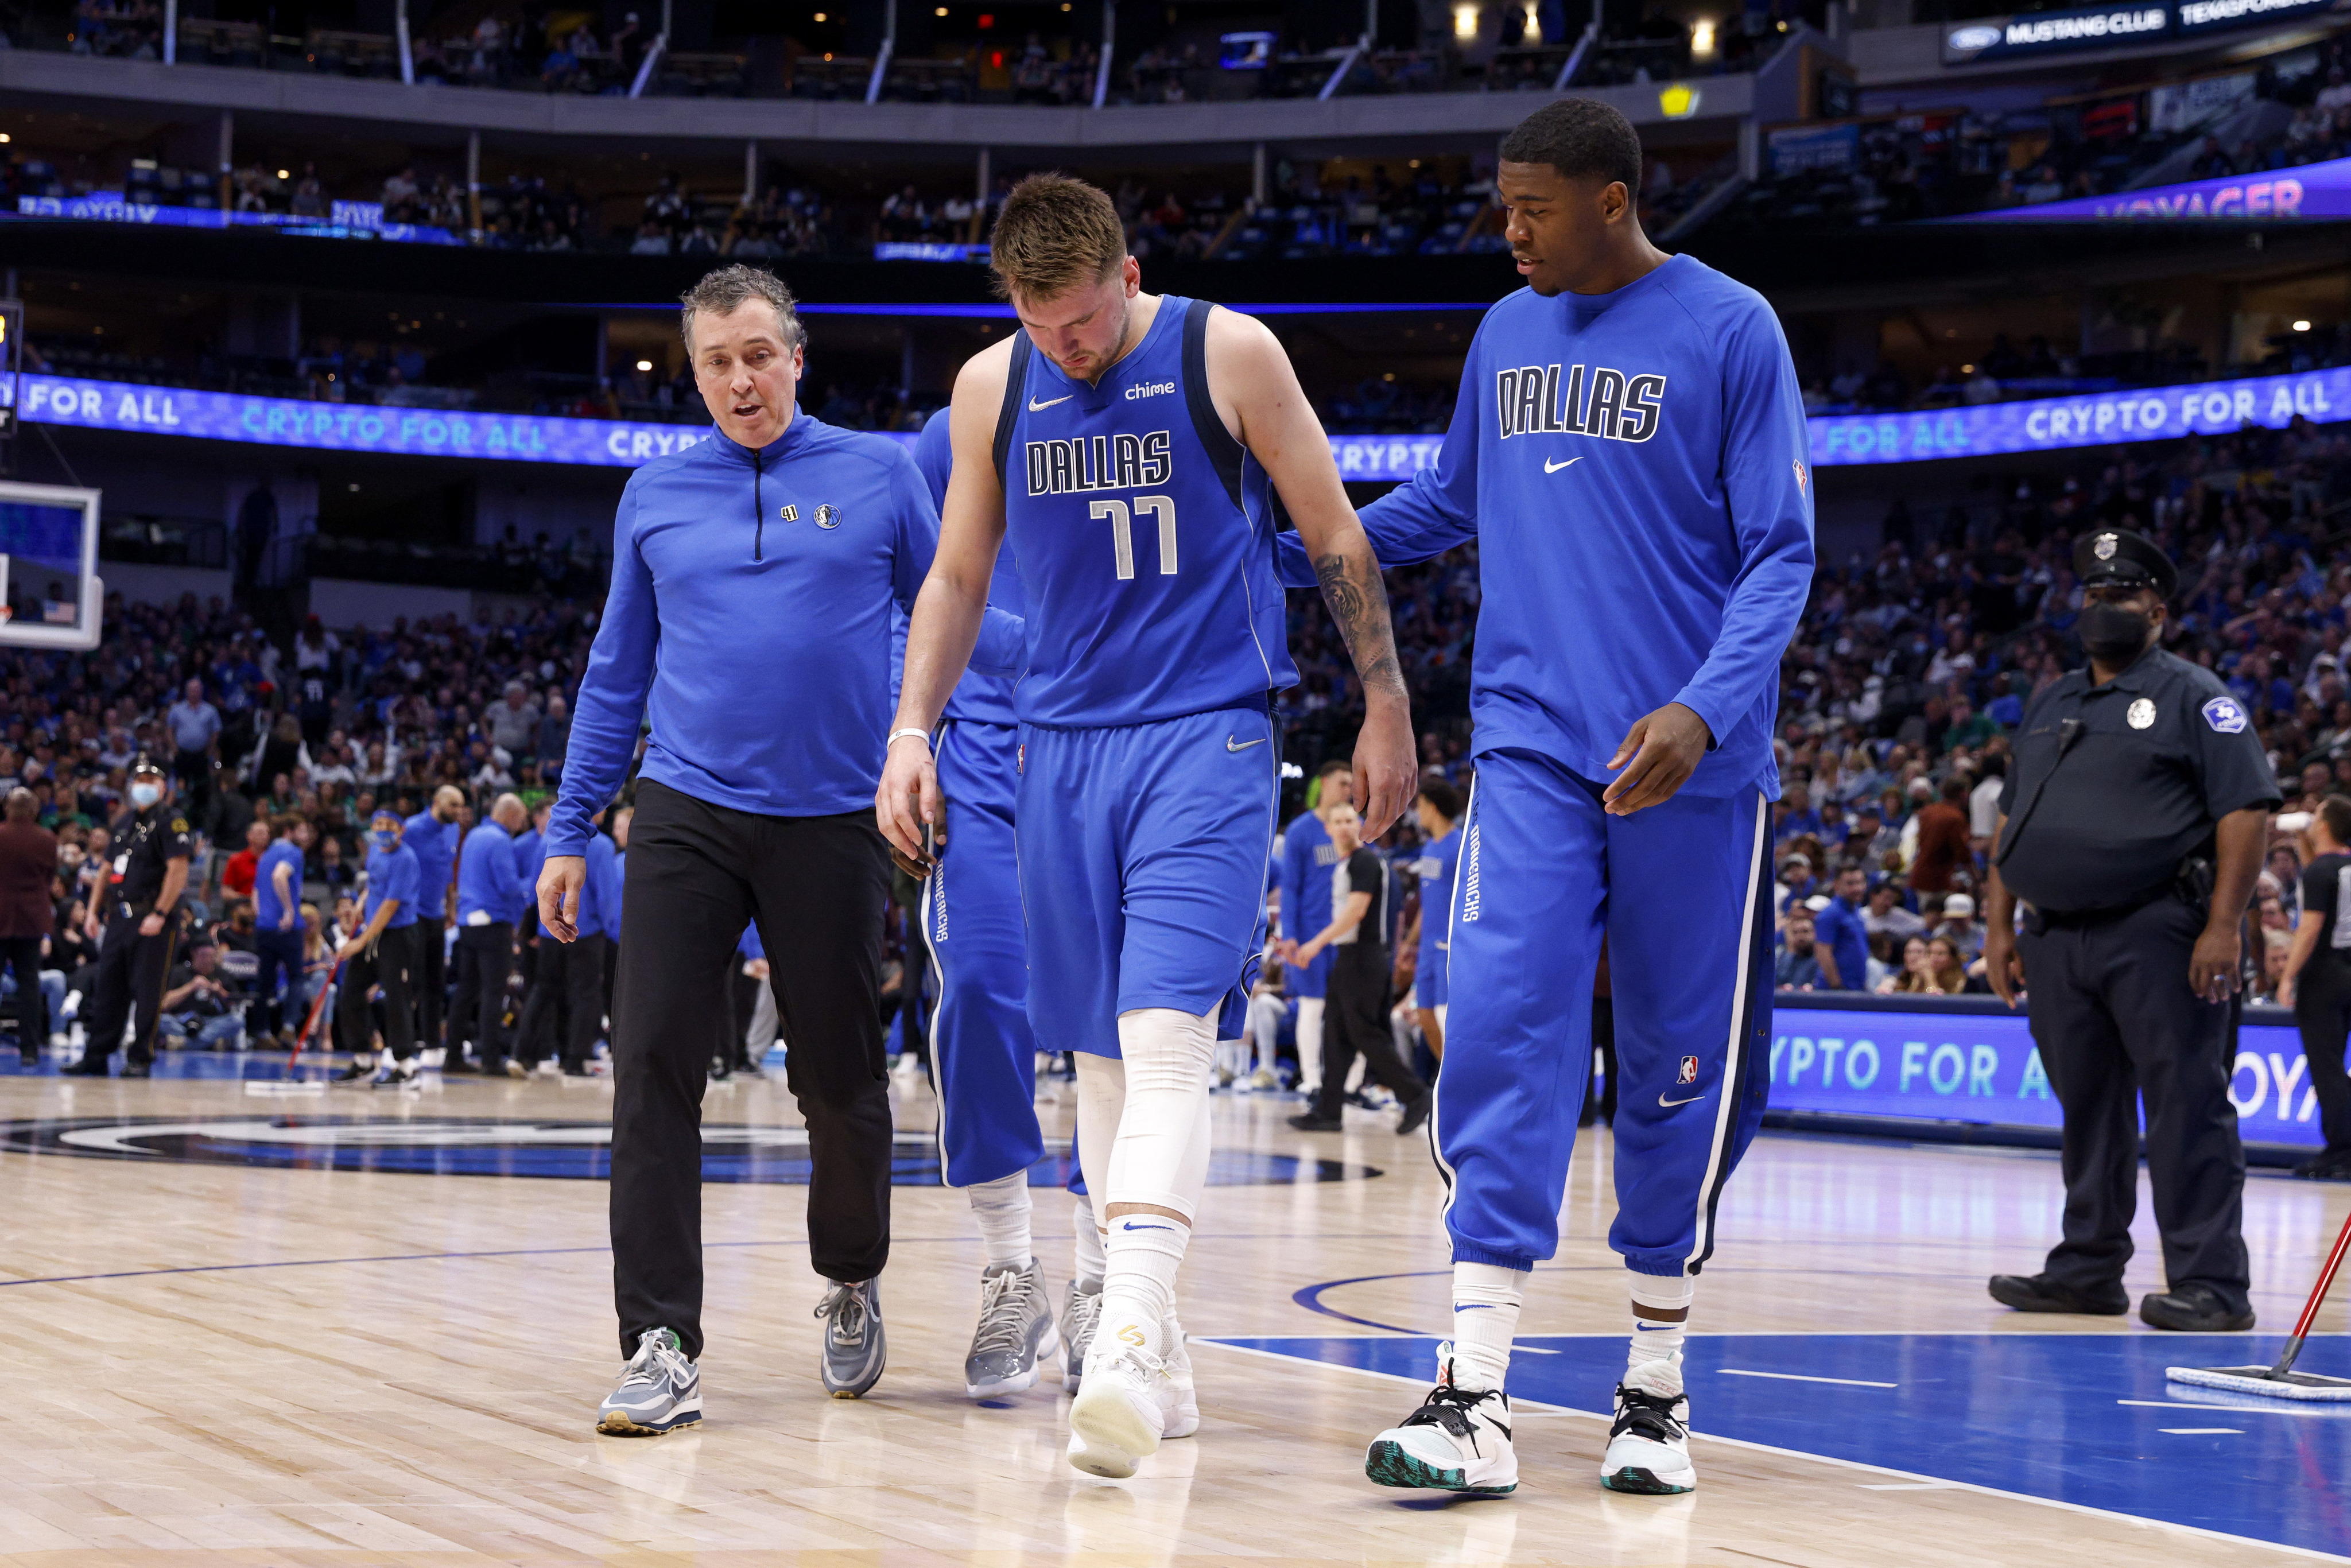 The Athletic on X: The Dallas Mavericks announce that an MRI confirms a  left calf strain for Luka Dončić. Dončić has begun treatment and there is  no timetable for his return ahead